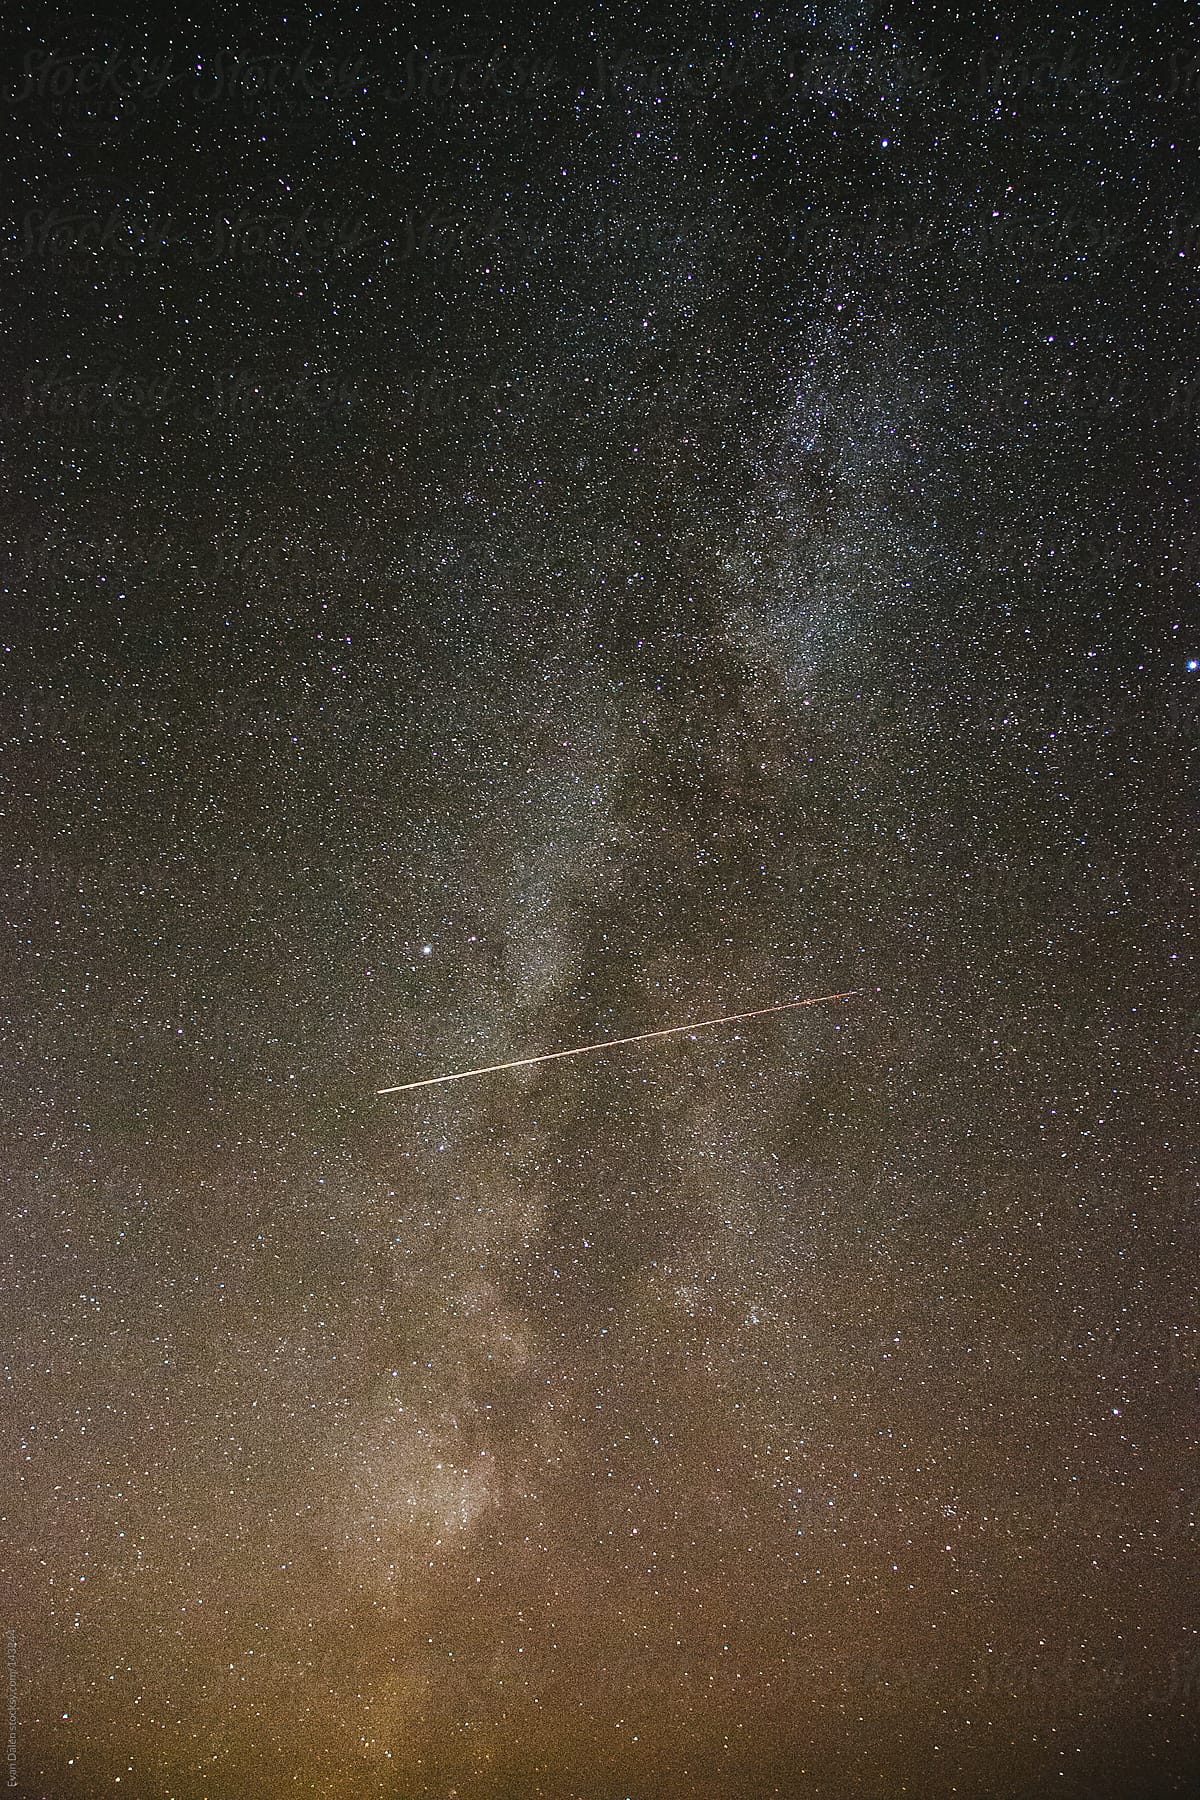 Milky Way Galaxy with Shooting Star